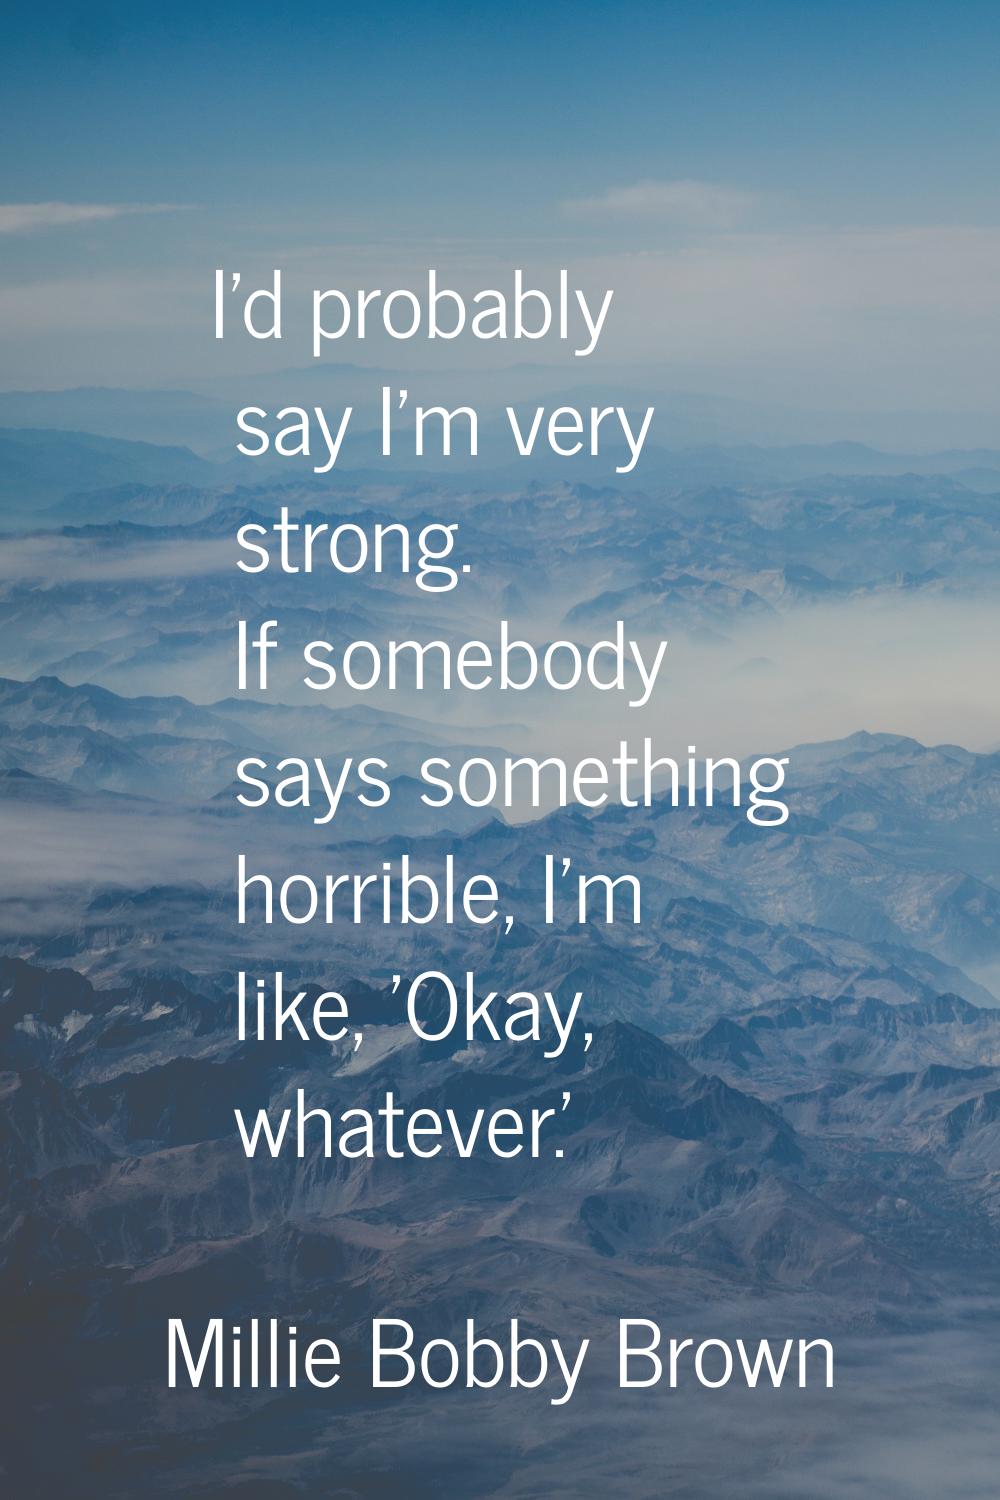 I'd probably say I'm very strong. If somebody says something horrible, I'm like, 'Okay, whatever.'